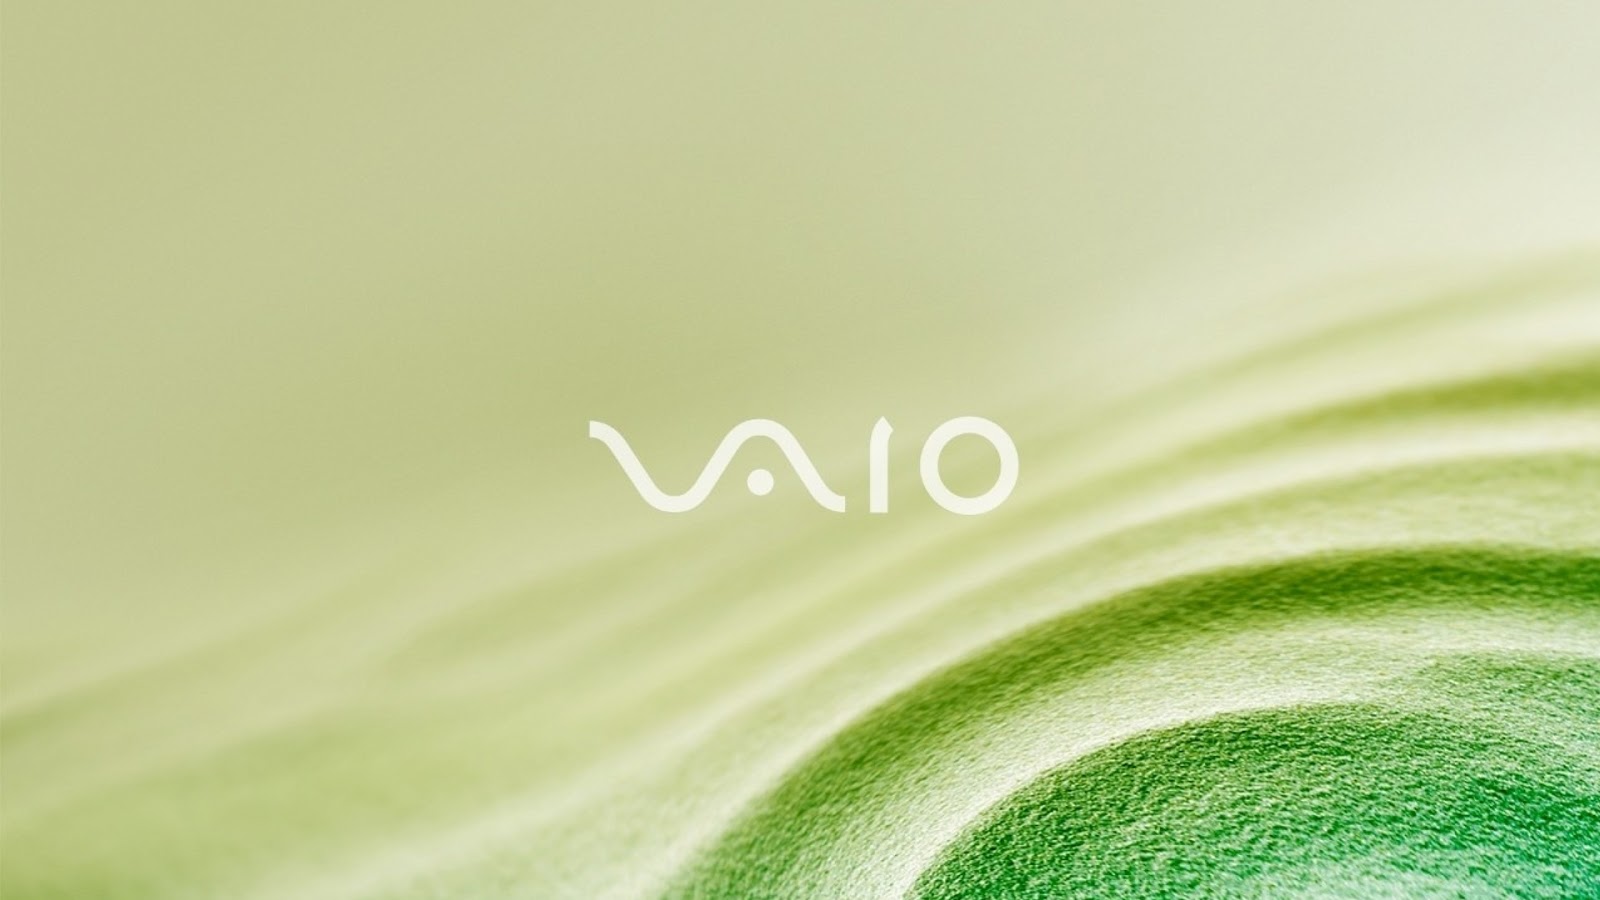 Free Download Sony Vaio Hd Wallpapers Hd Wallpapers High Definition Iphone Hd 1600x900 For Your Desktop Mobile Tablet Explore 50 Sony Vaio Wallpaper 1080p Sony Wallpapers 1920x1080 Sony Vaio